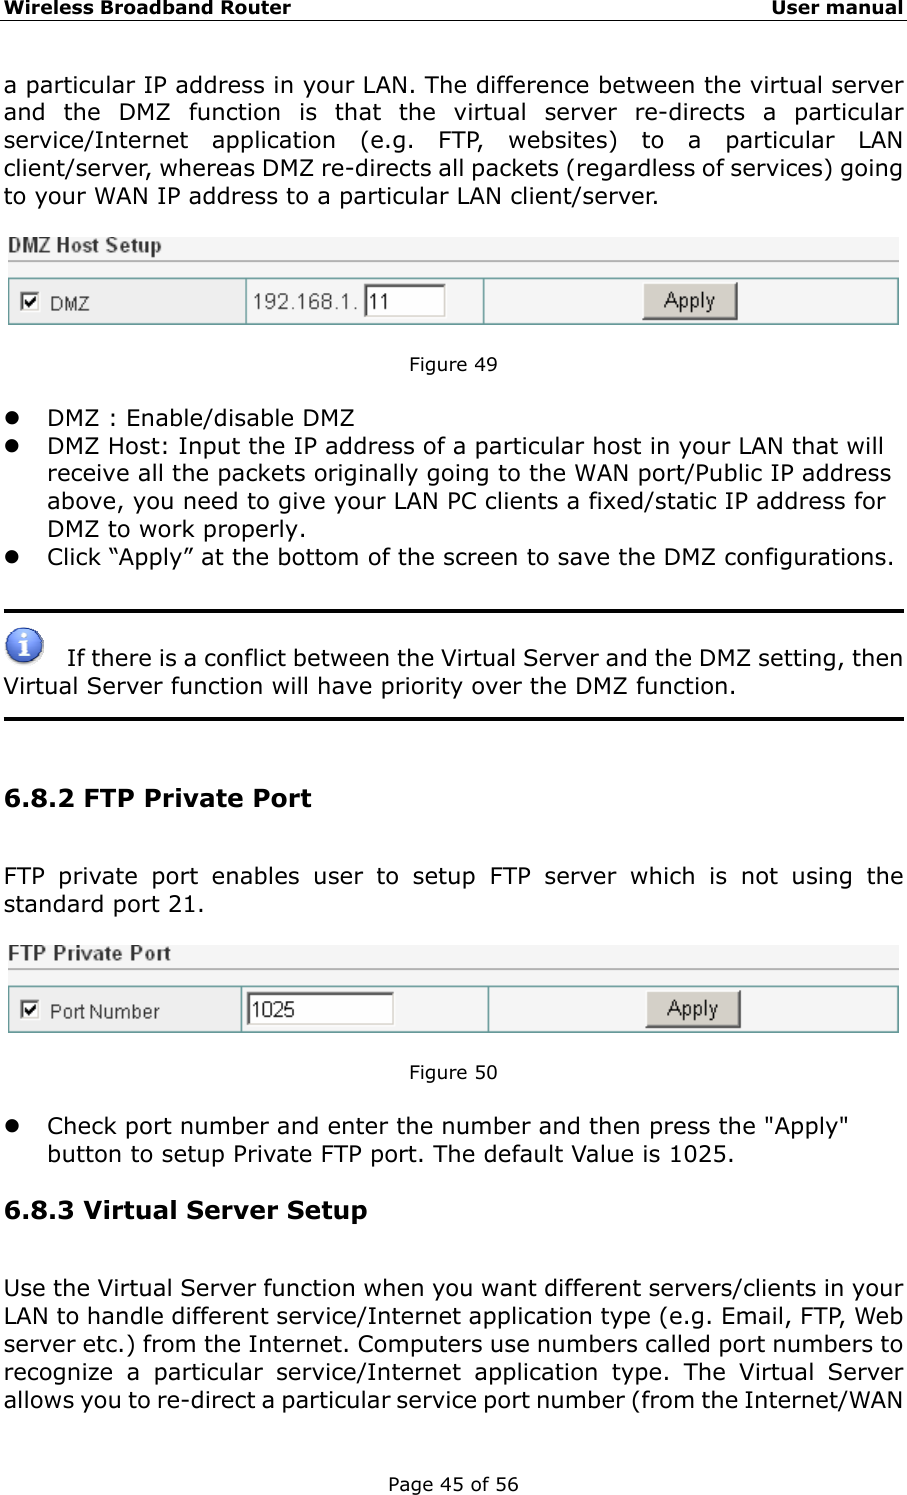 Wireless Broadband Router                                                   User manual Page 45 of 56 a particular IP address in your LAN. The difference between the virtual server and the DMZ function is that the virtual server re-directs a particular service/Internet application (e.g. FTP, websites) to a particular LAN client/server, whereas DMZ re-directs all packets (regardless of services) going to your WAN IP address to a particular LAN client/server.    Figure 49  z DMZ : Enable/disable DMZ z DMZ Host: Input the IP address of a particular host in your LAN that will receive all the packets originally going to the WAN port/Public IP address above, you need to give your LAN PC clients a fixed/static IP address for DMZ to work properly. z Click “Apply” at the bottom of the screen to save the DMZ configurations.       If there is a conflict between the Virtual Server and the DMZ setting, then Virtual Server function will have priority over the DMZ function.     6.8.2 FTP Private Port FTP private port enables user to setup FTP server which is not using the standard port 21.    Figure 50  z Check port number and enter the number and then press the &quot;Apply&quot; button to setup Private FTP port. The default Value is 1025. 6.8.3 Virtual Server Setup Use the Virtual Server function when you want different servers/clients in your LAN to handle different service/Internet application type (e.g. Email, FTP, Web server etc.) from the Internet. Computers use numbers called port numbers to recognize a particular service/Internet application type. The Virtual Server allows you to re-direct a particular service port number (from the Internet/WAN 